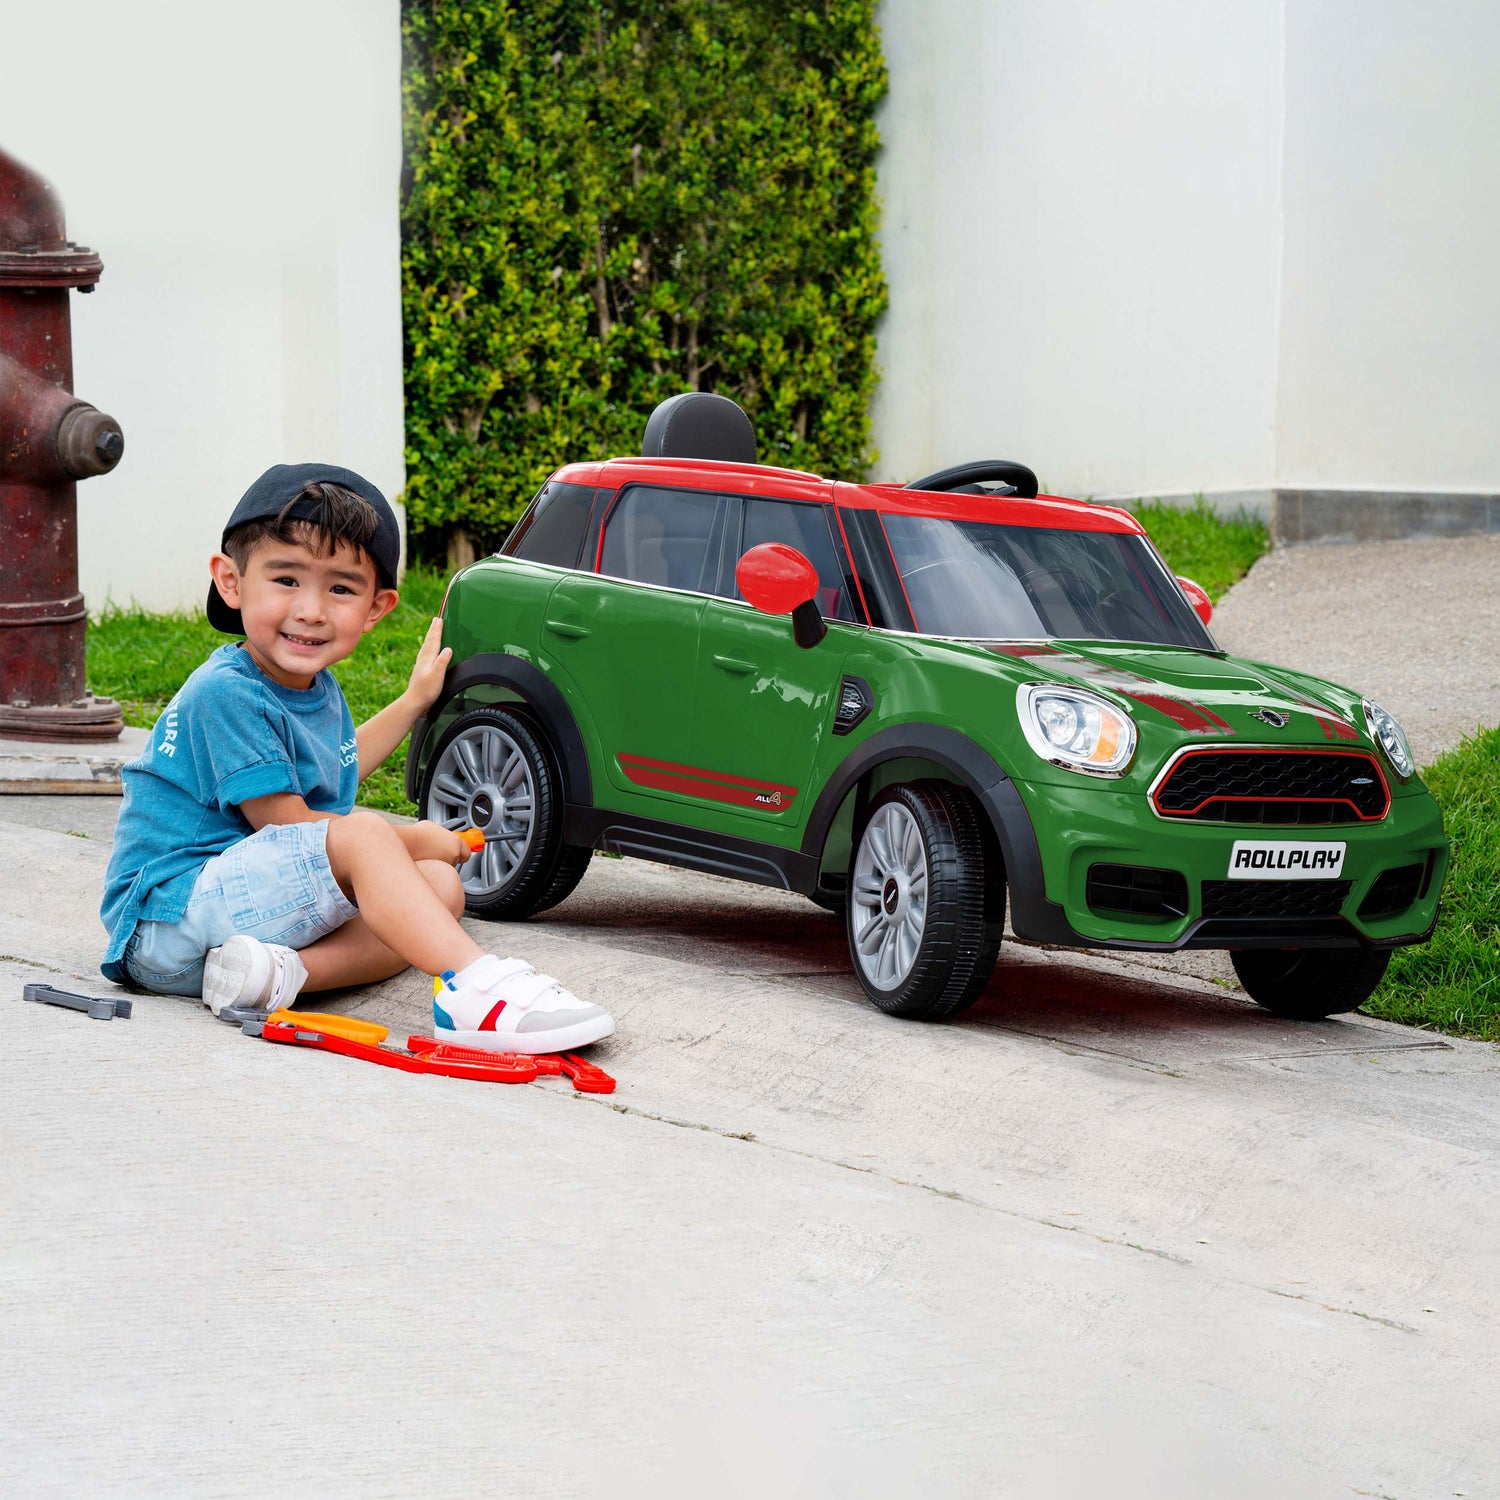 Mini Countryman 12 Volt Premium Car with Remote Control - Green - The Online Toy Shop - Powered Car - 2